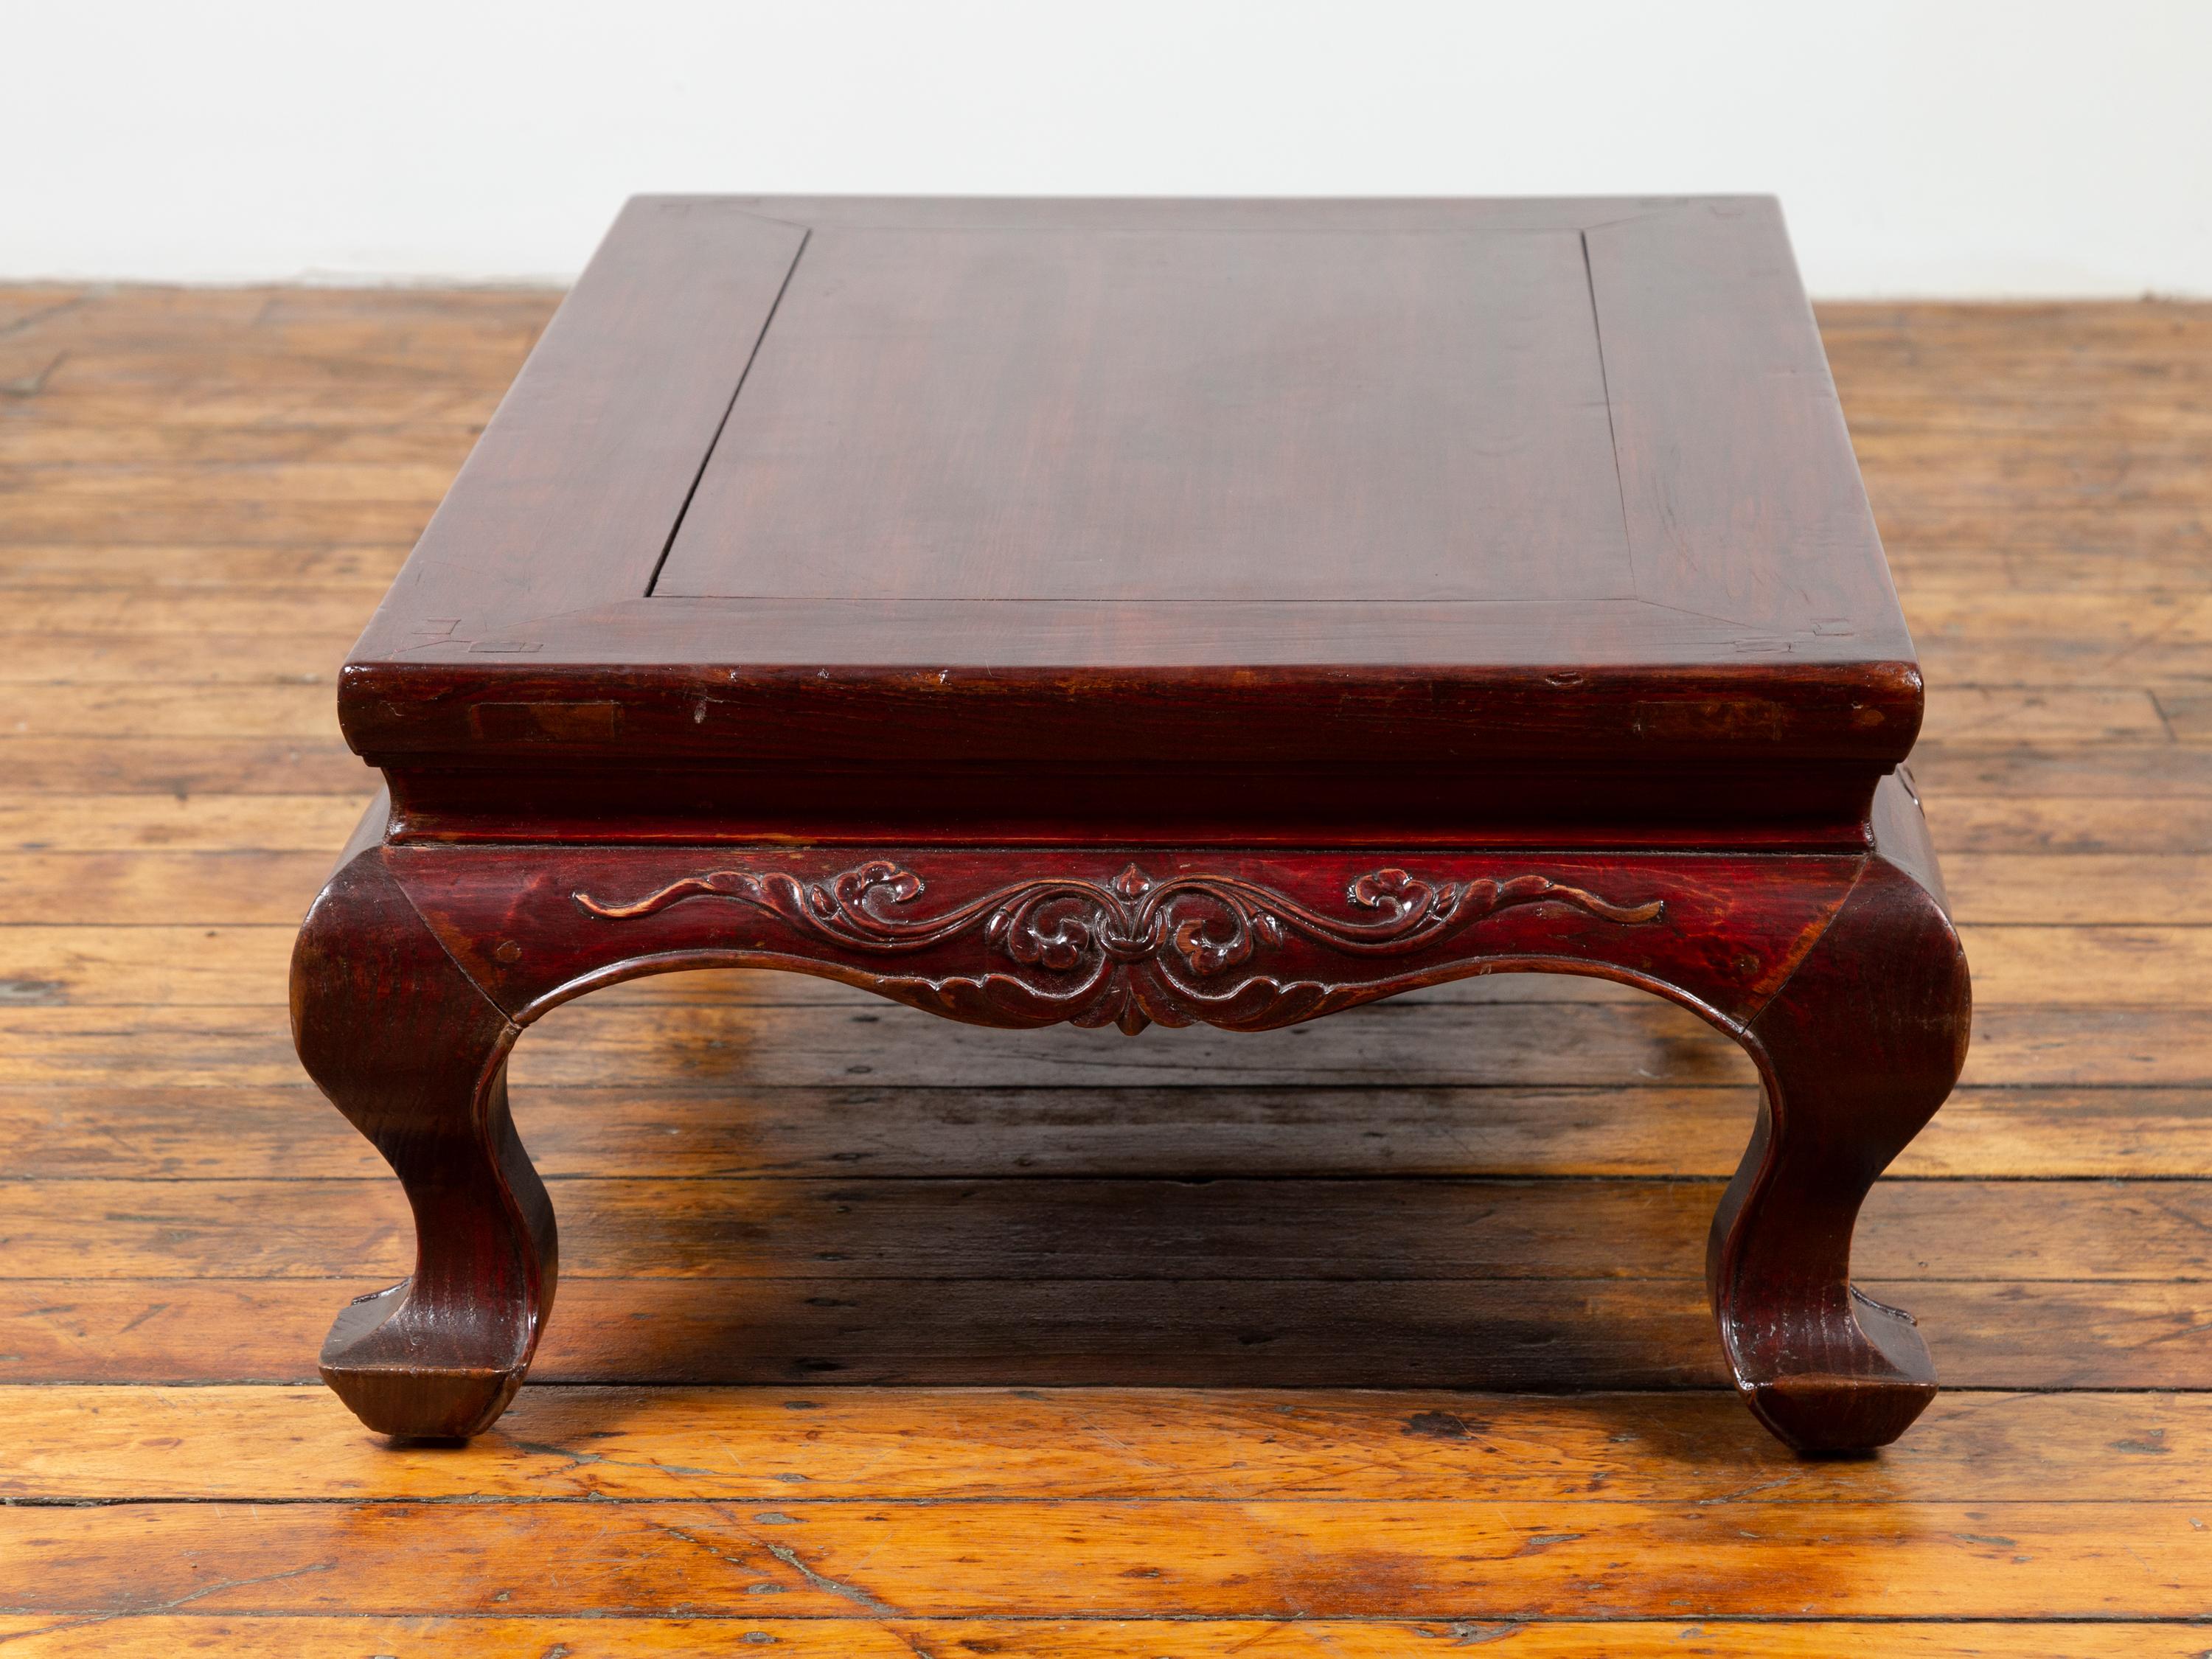 Chinese Qing Dynasty 19th Century Lacquered Wood Low Table with Cabriole Legs For Sale 2